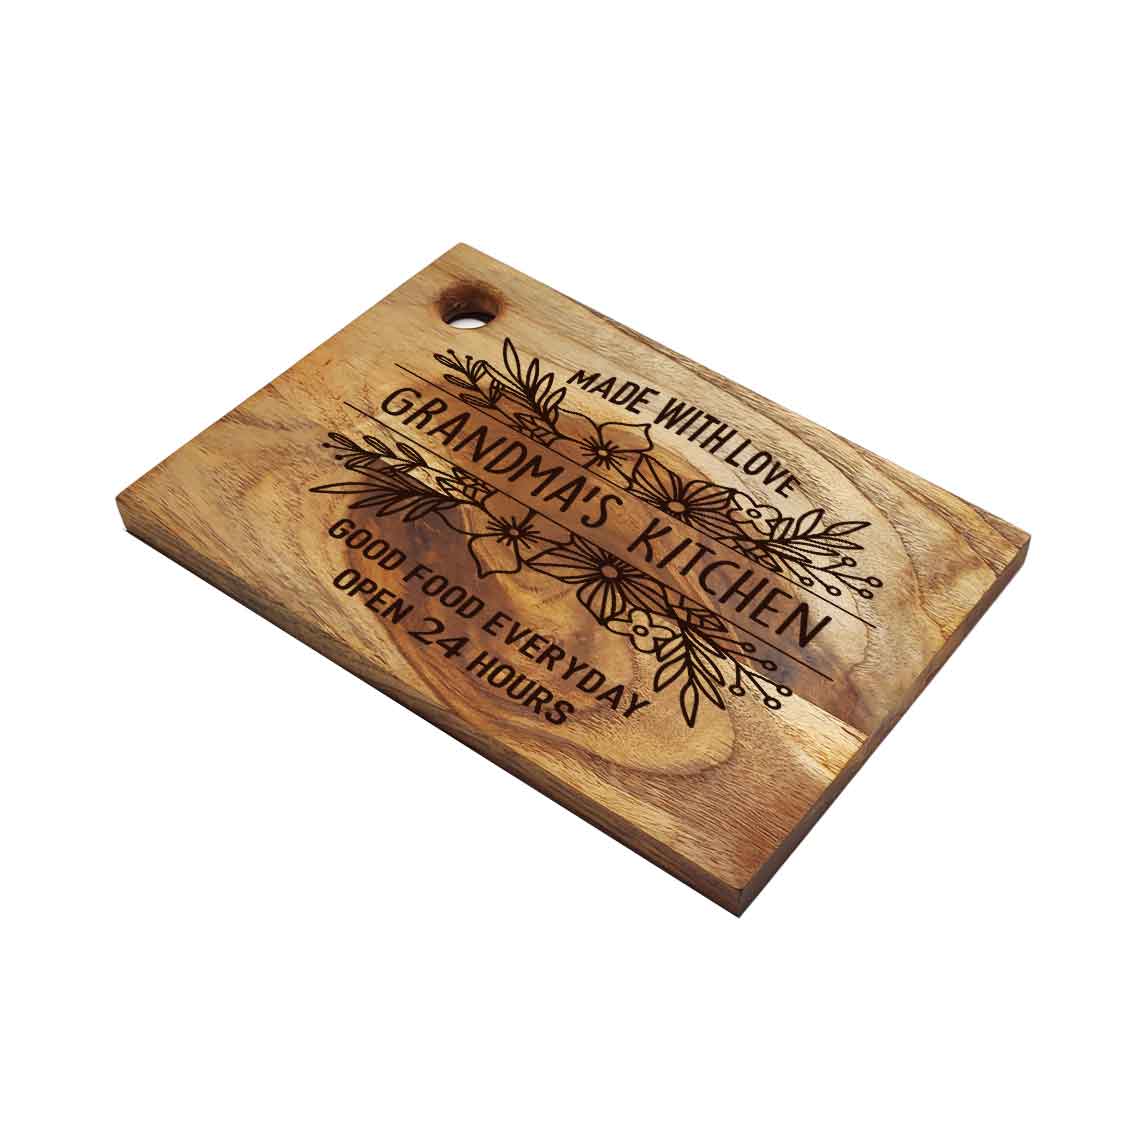 Custom Engraved Cutting Board Wooden Vegetable Chopping Stand Mother Day Gift - Grandma's kitchen